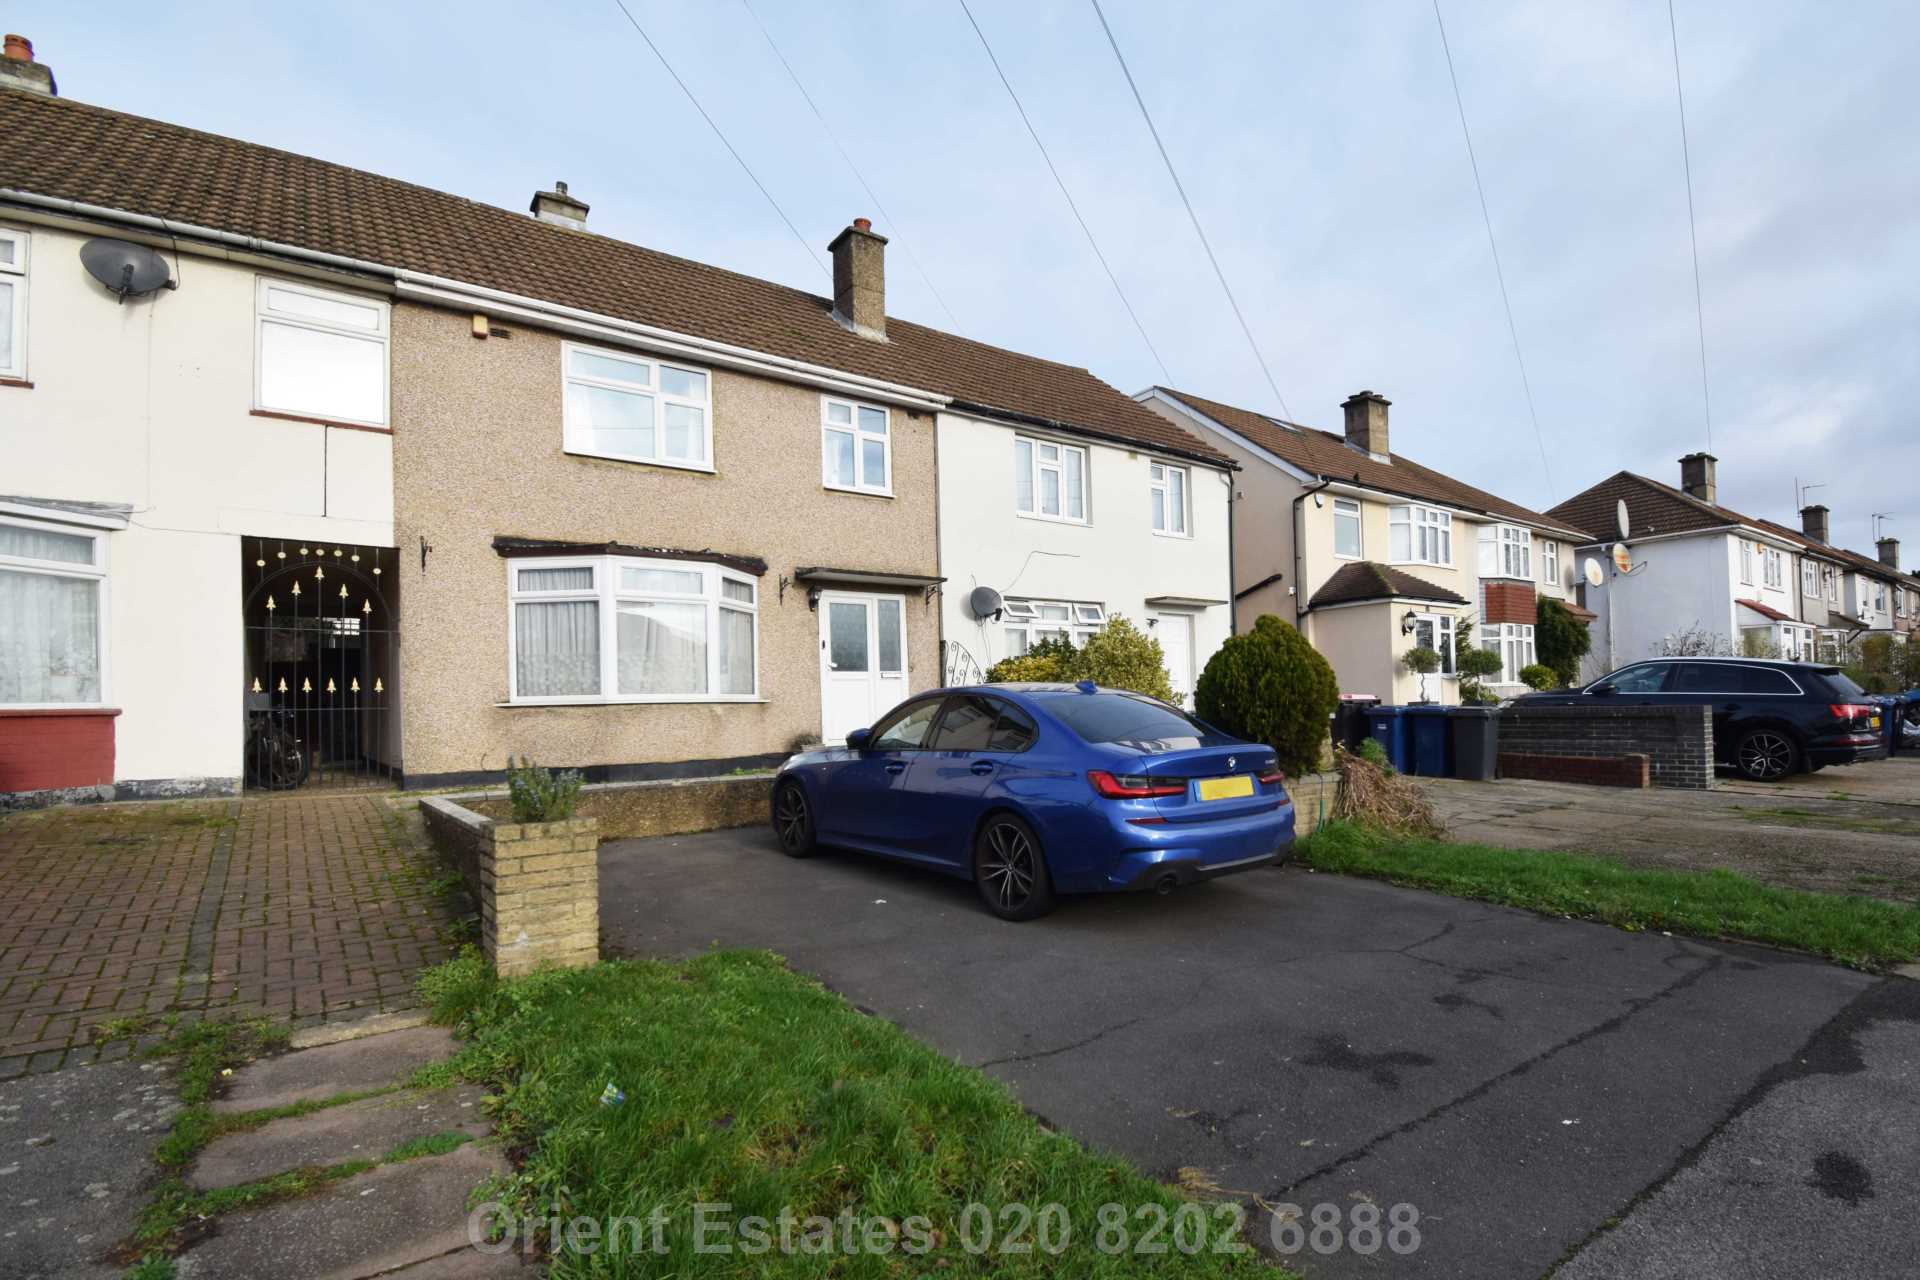 Layfield Road, Hendon, Image 11